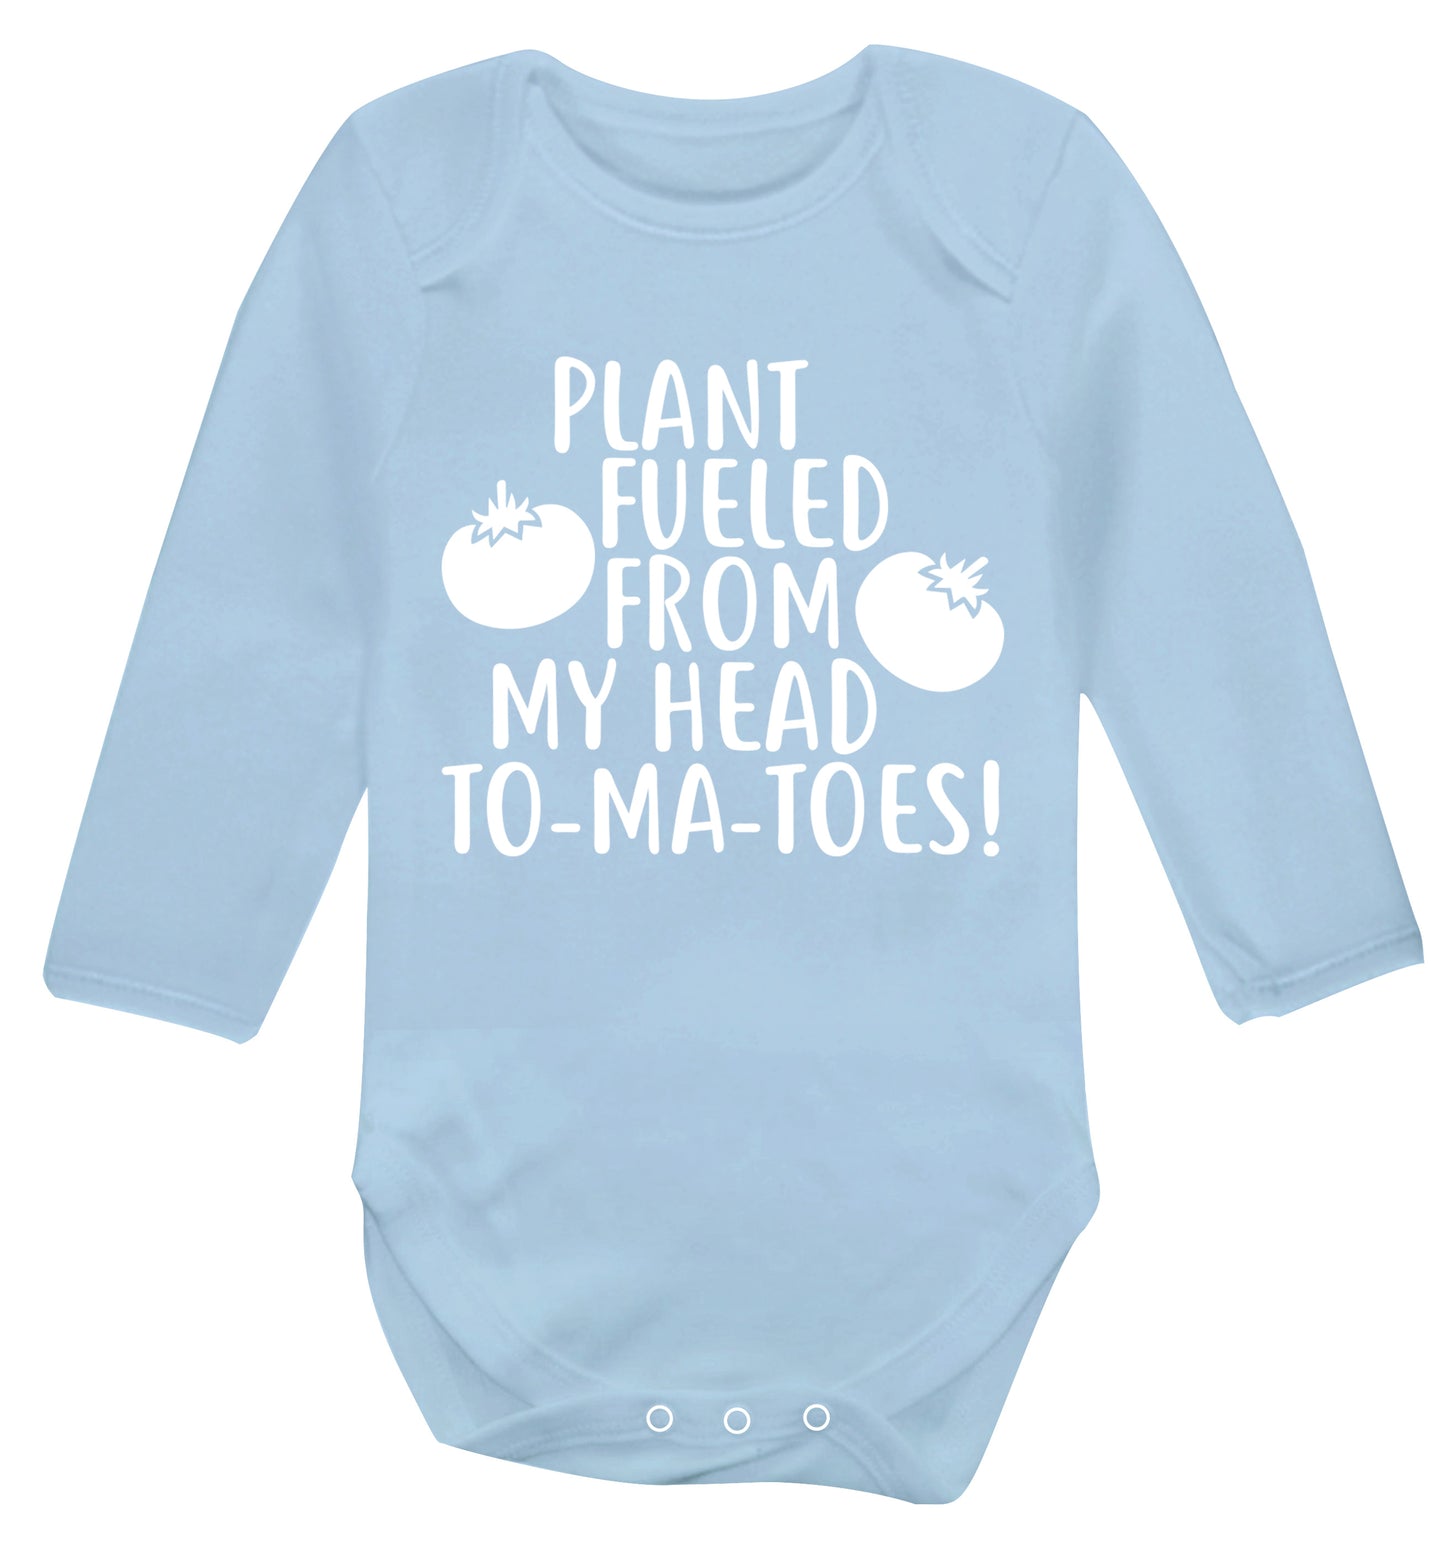 Plant fueled from my head to-ma-toes Baby Vest long sleeved pale blue 6-12 months